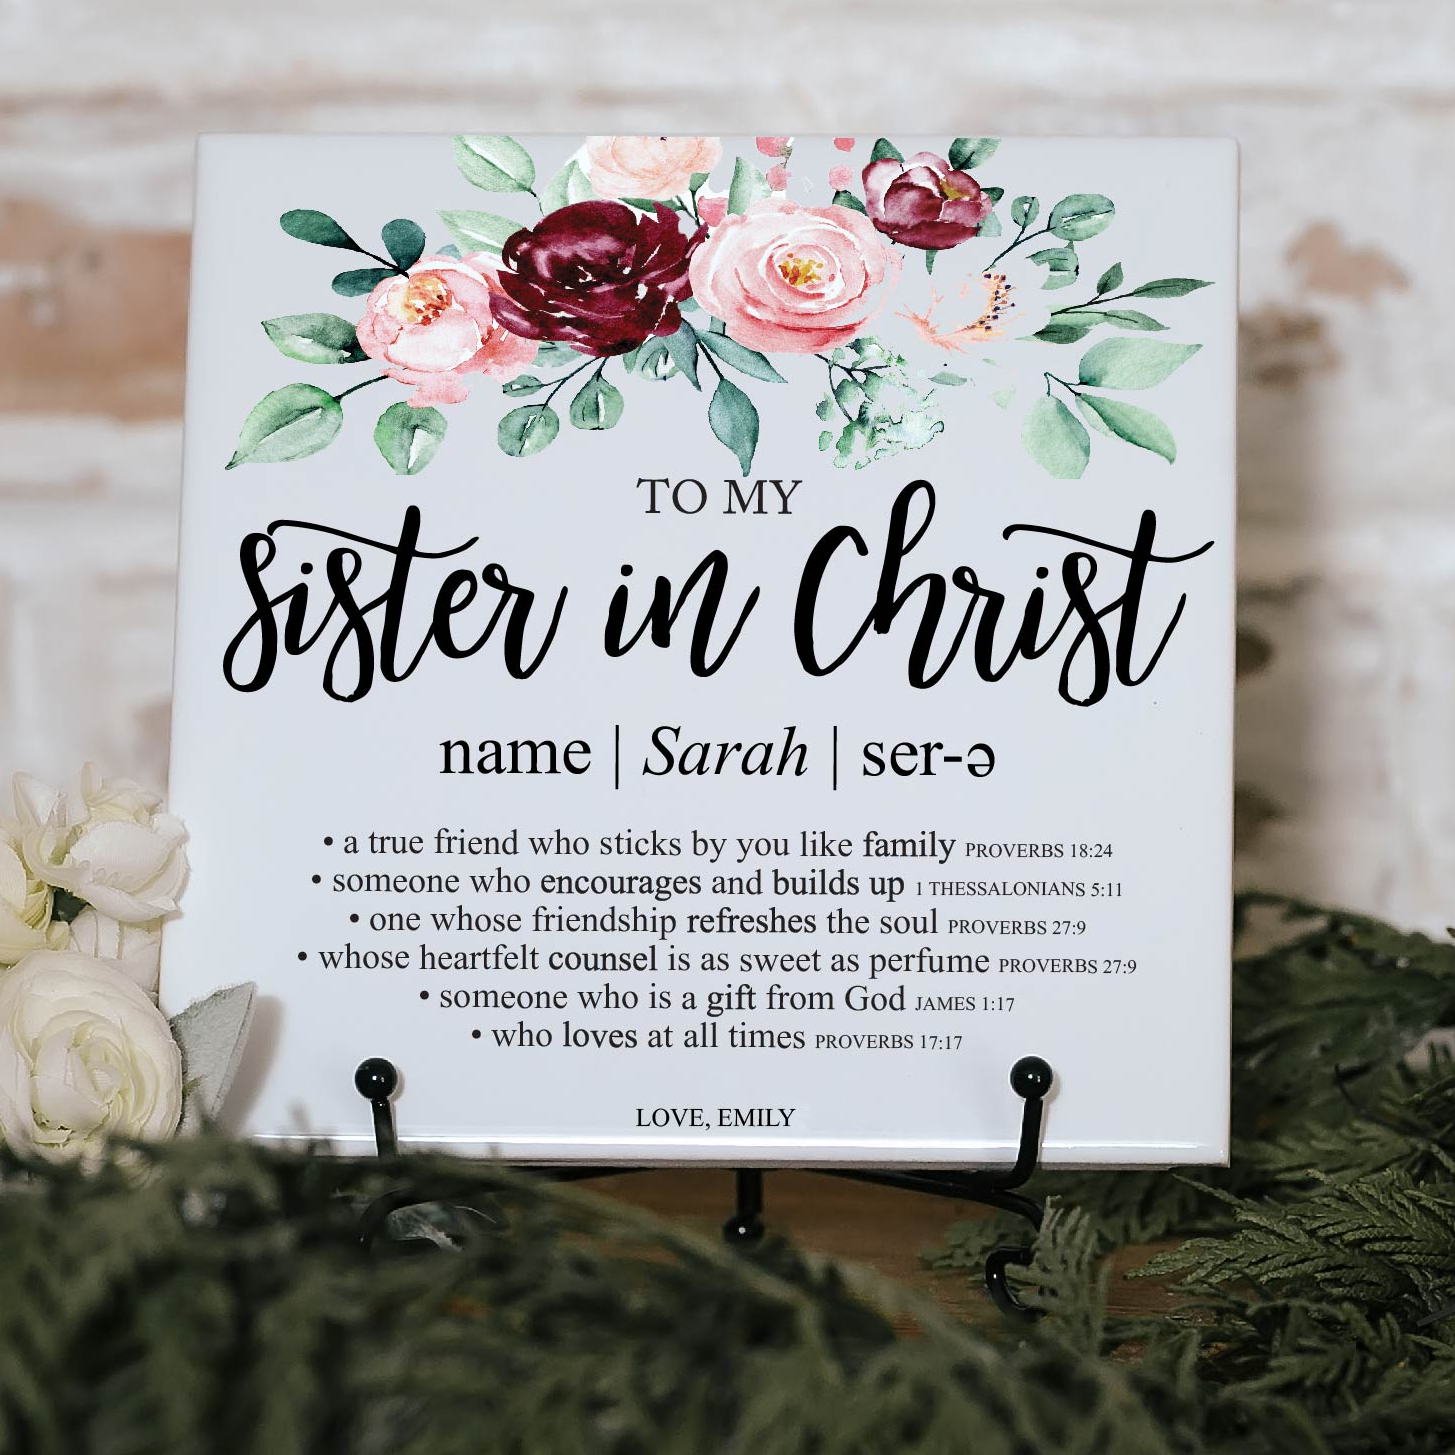 Sister In Christ Dictionary Definition Quote Art Tile Plaque